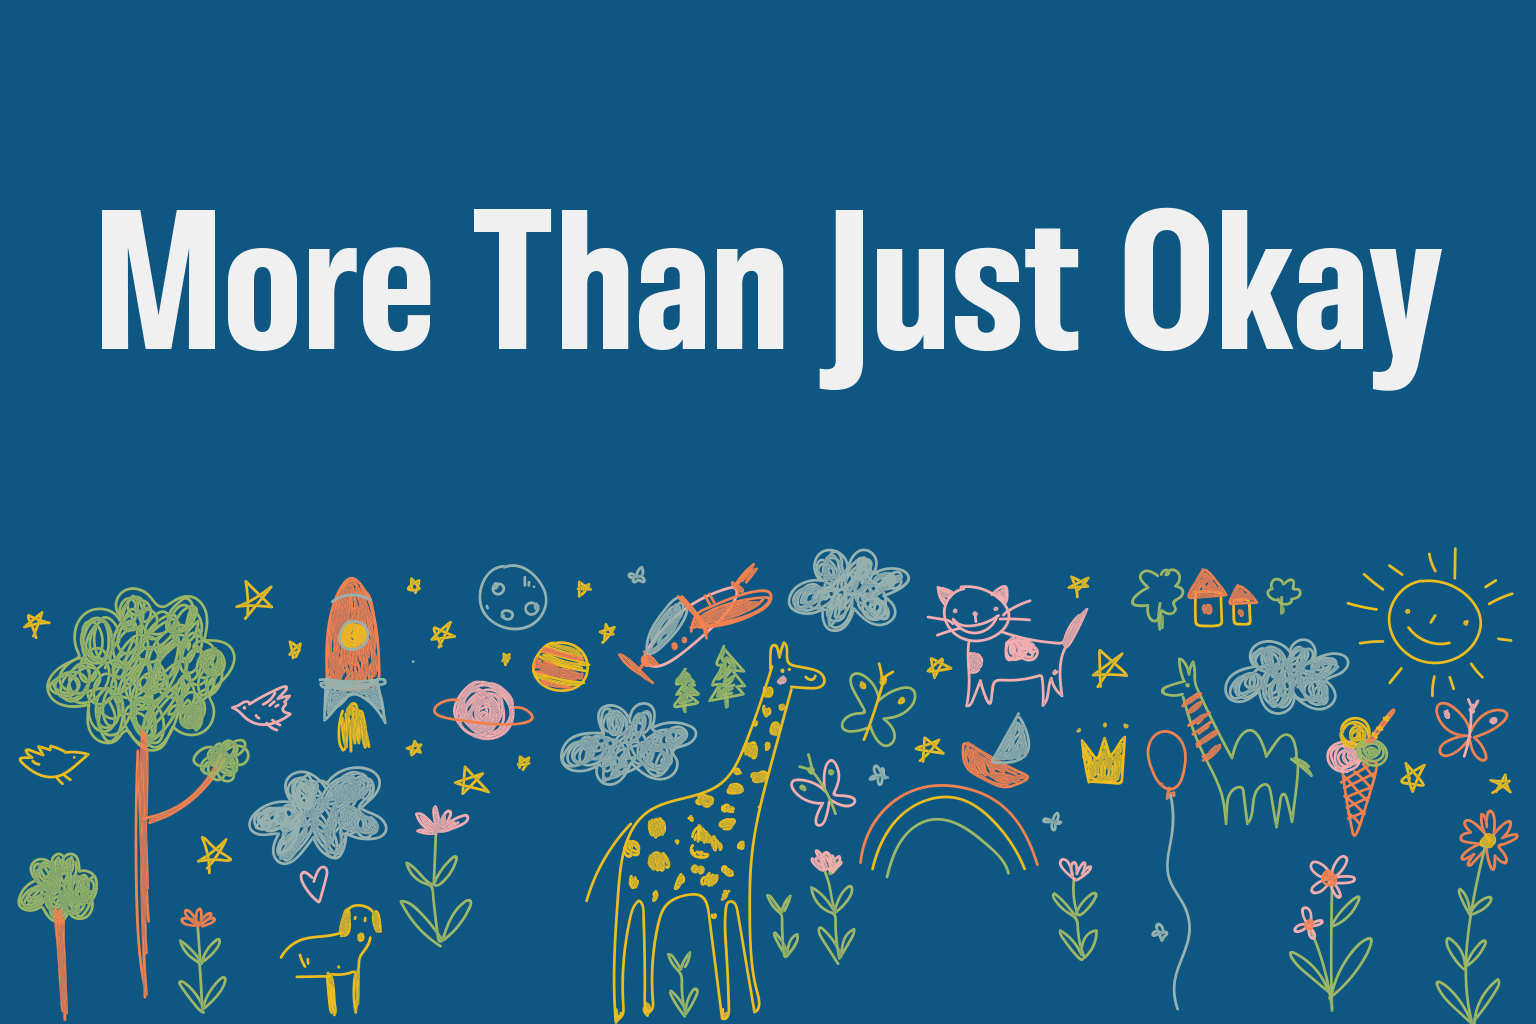 Kids should be more than just ok.